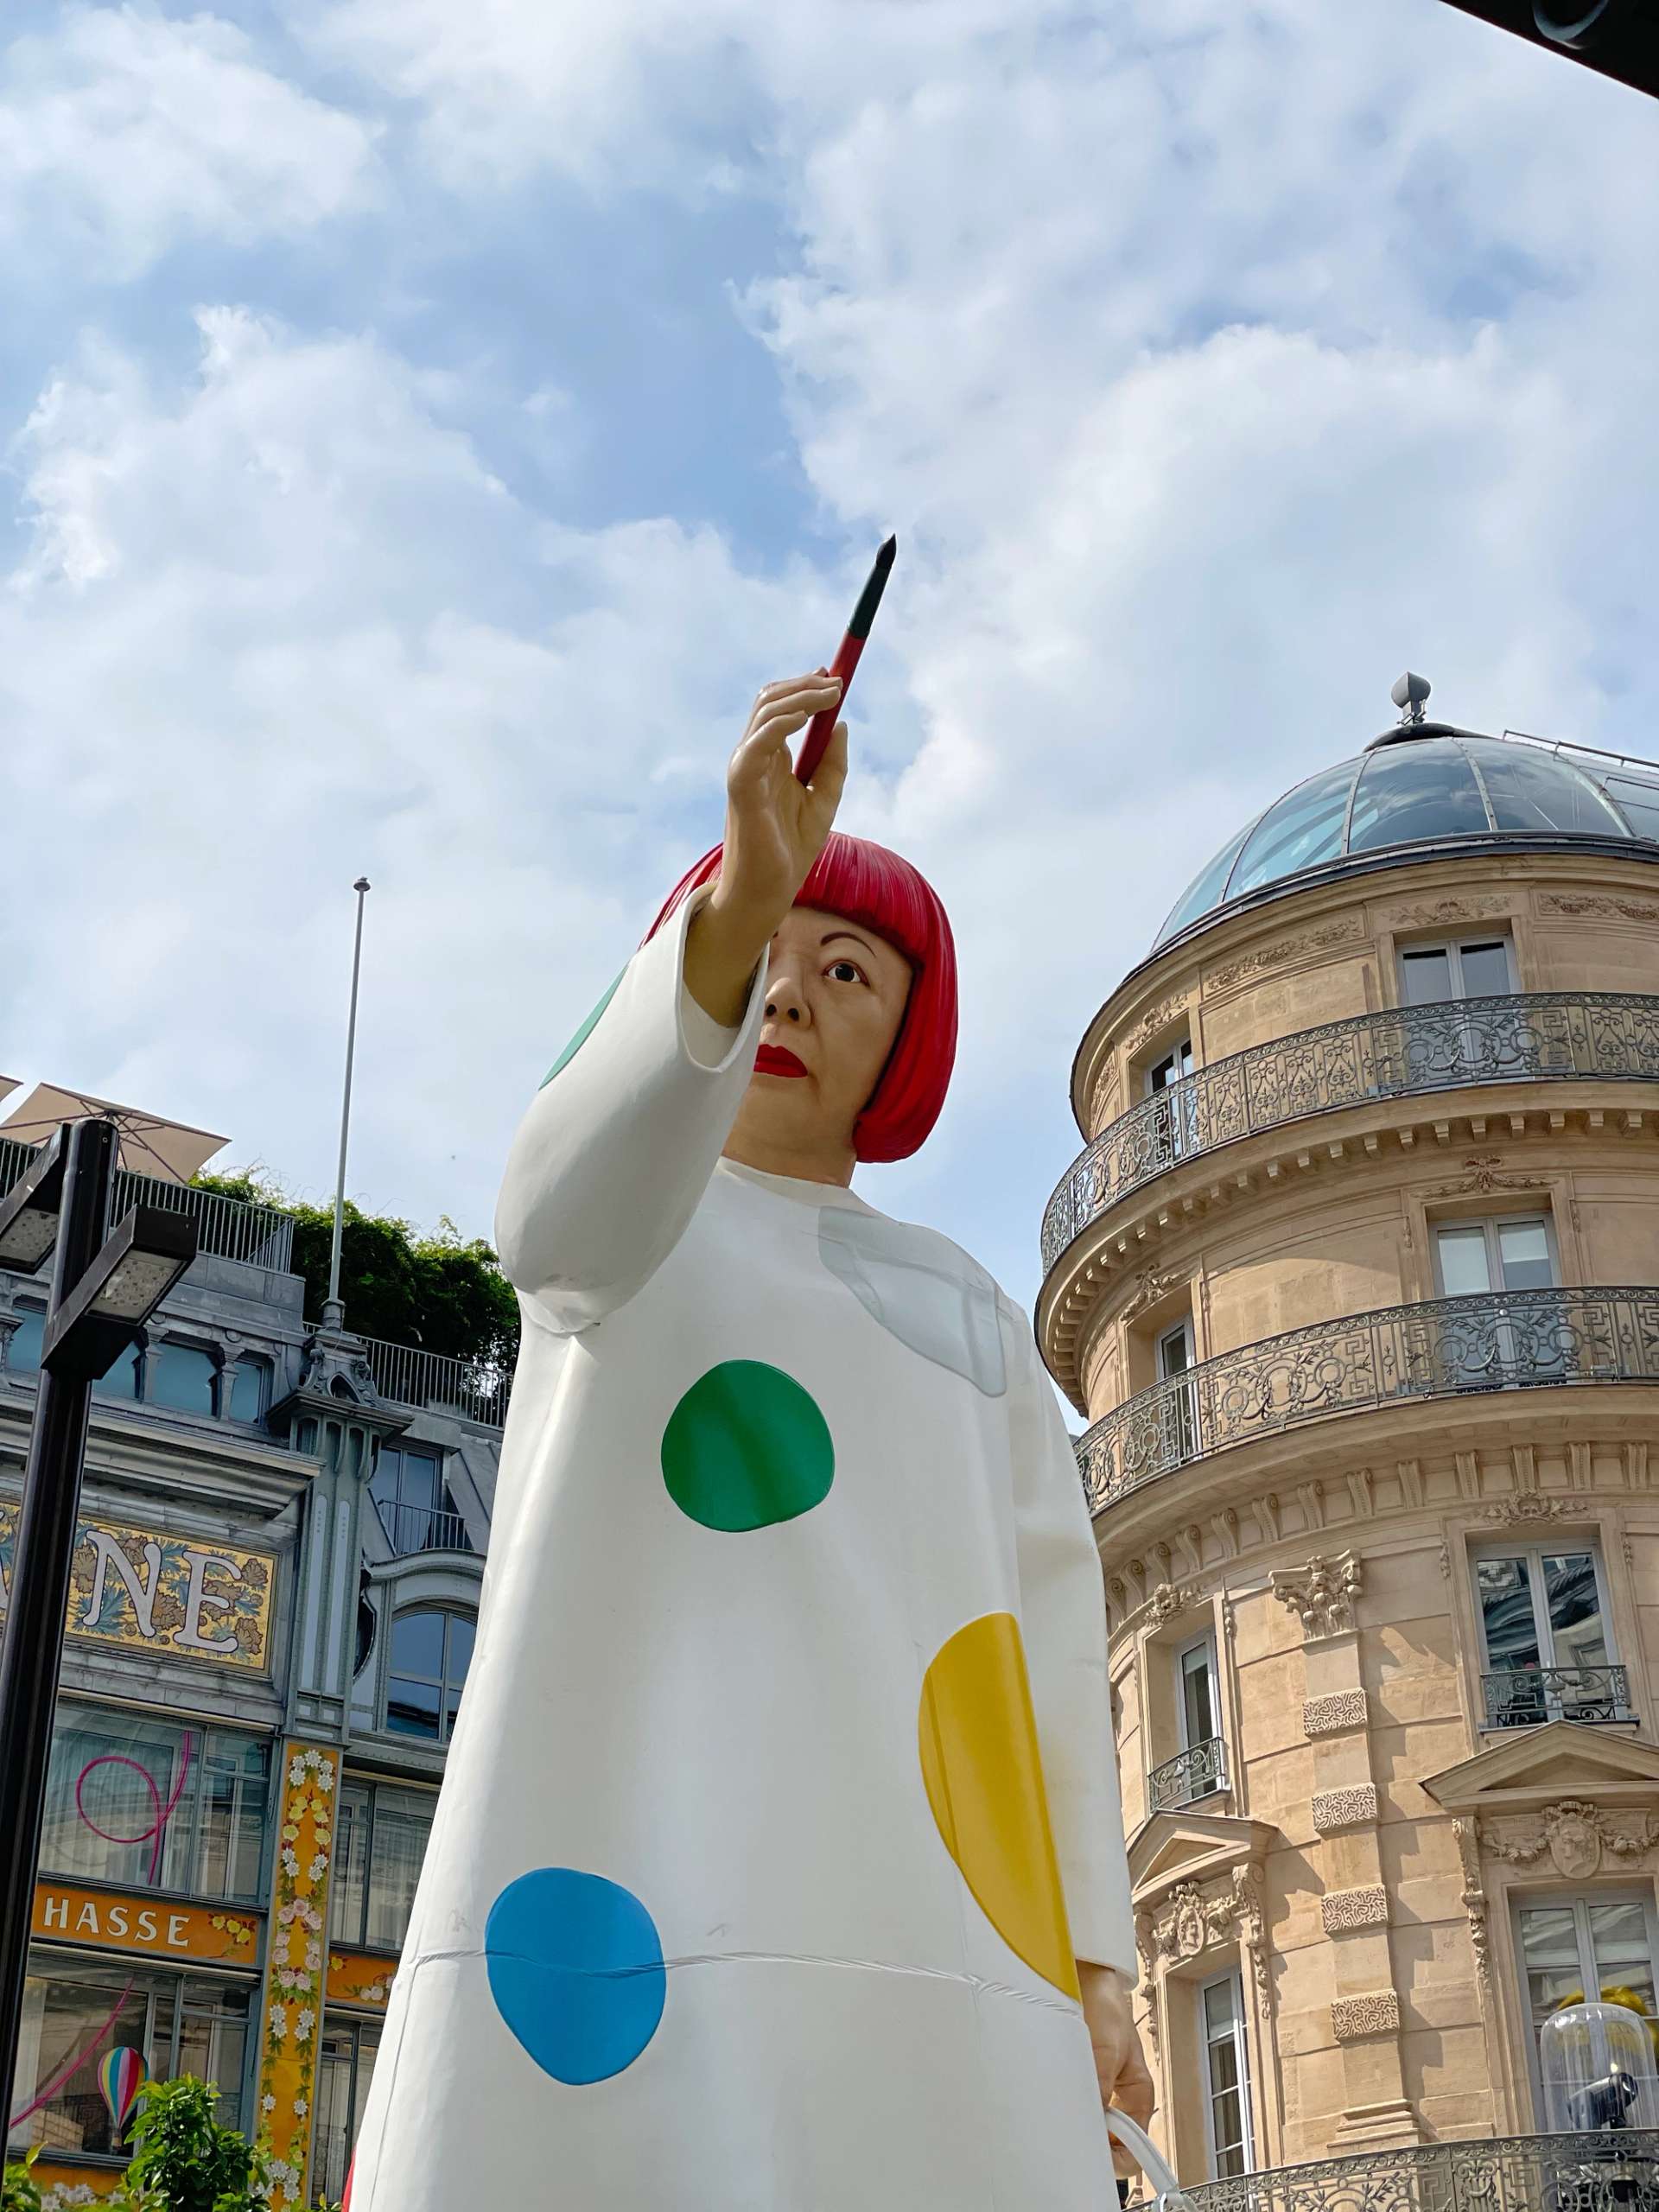 A photograph of the large sculpture of artist Yayoi Kusama in Paris. The sculpture shows the artist in a red bob wig, wearing a white gown with coloured polka dots, holding up a paintbrush